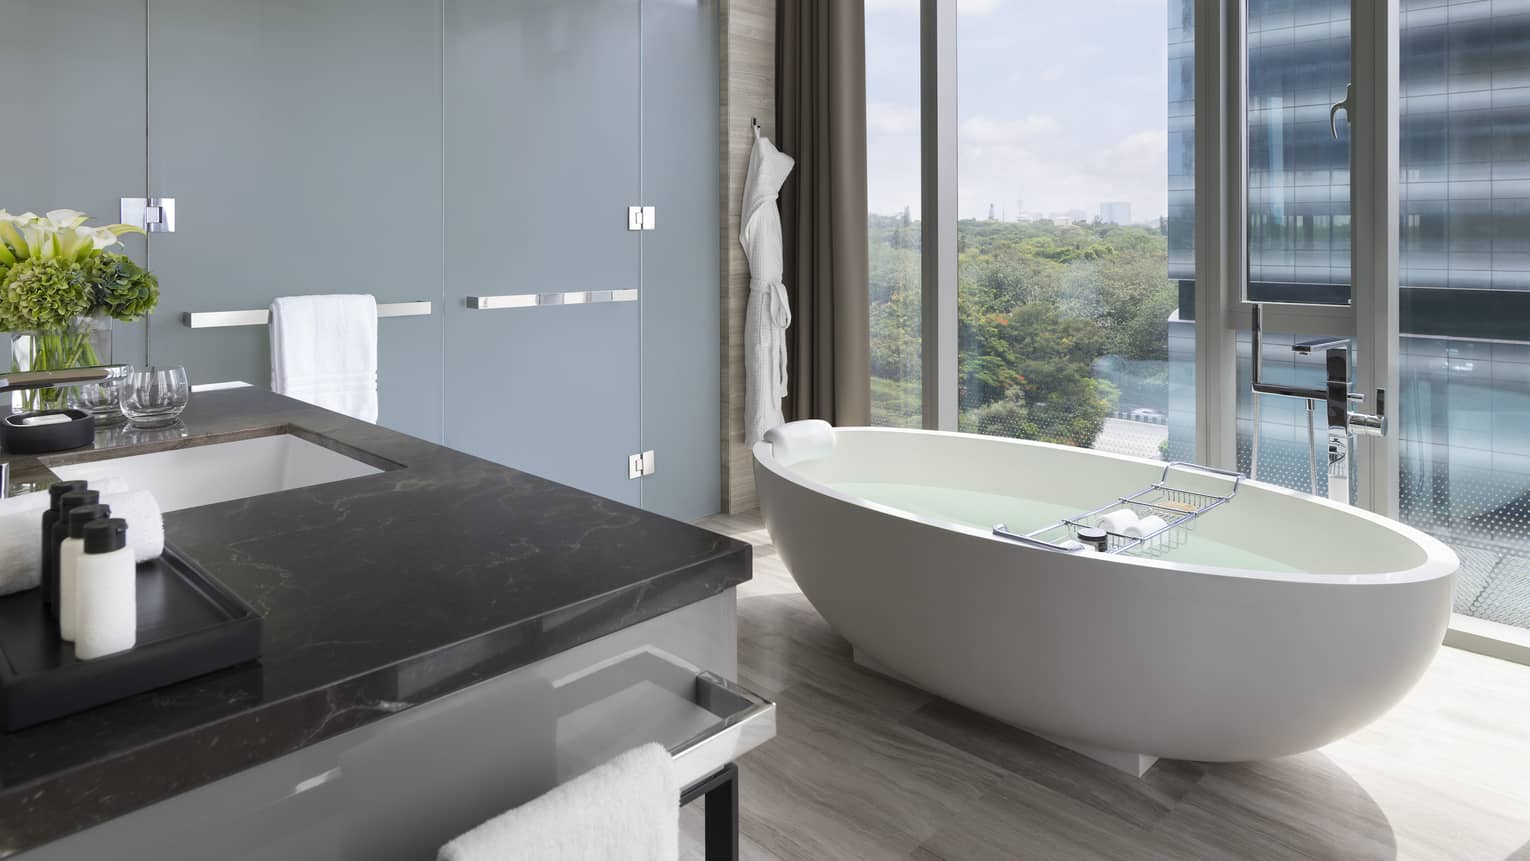 Bathroom with white free-standing tub set next to a floor-to-ceiling window